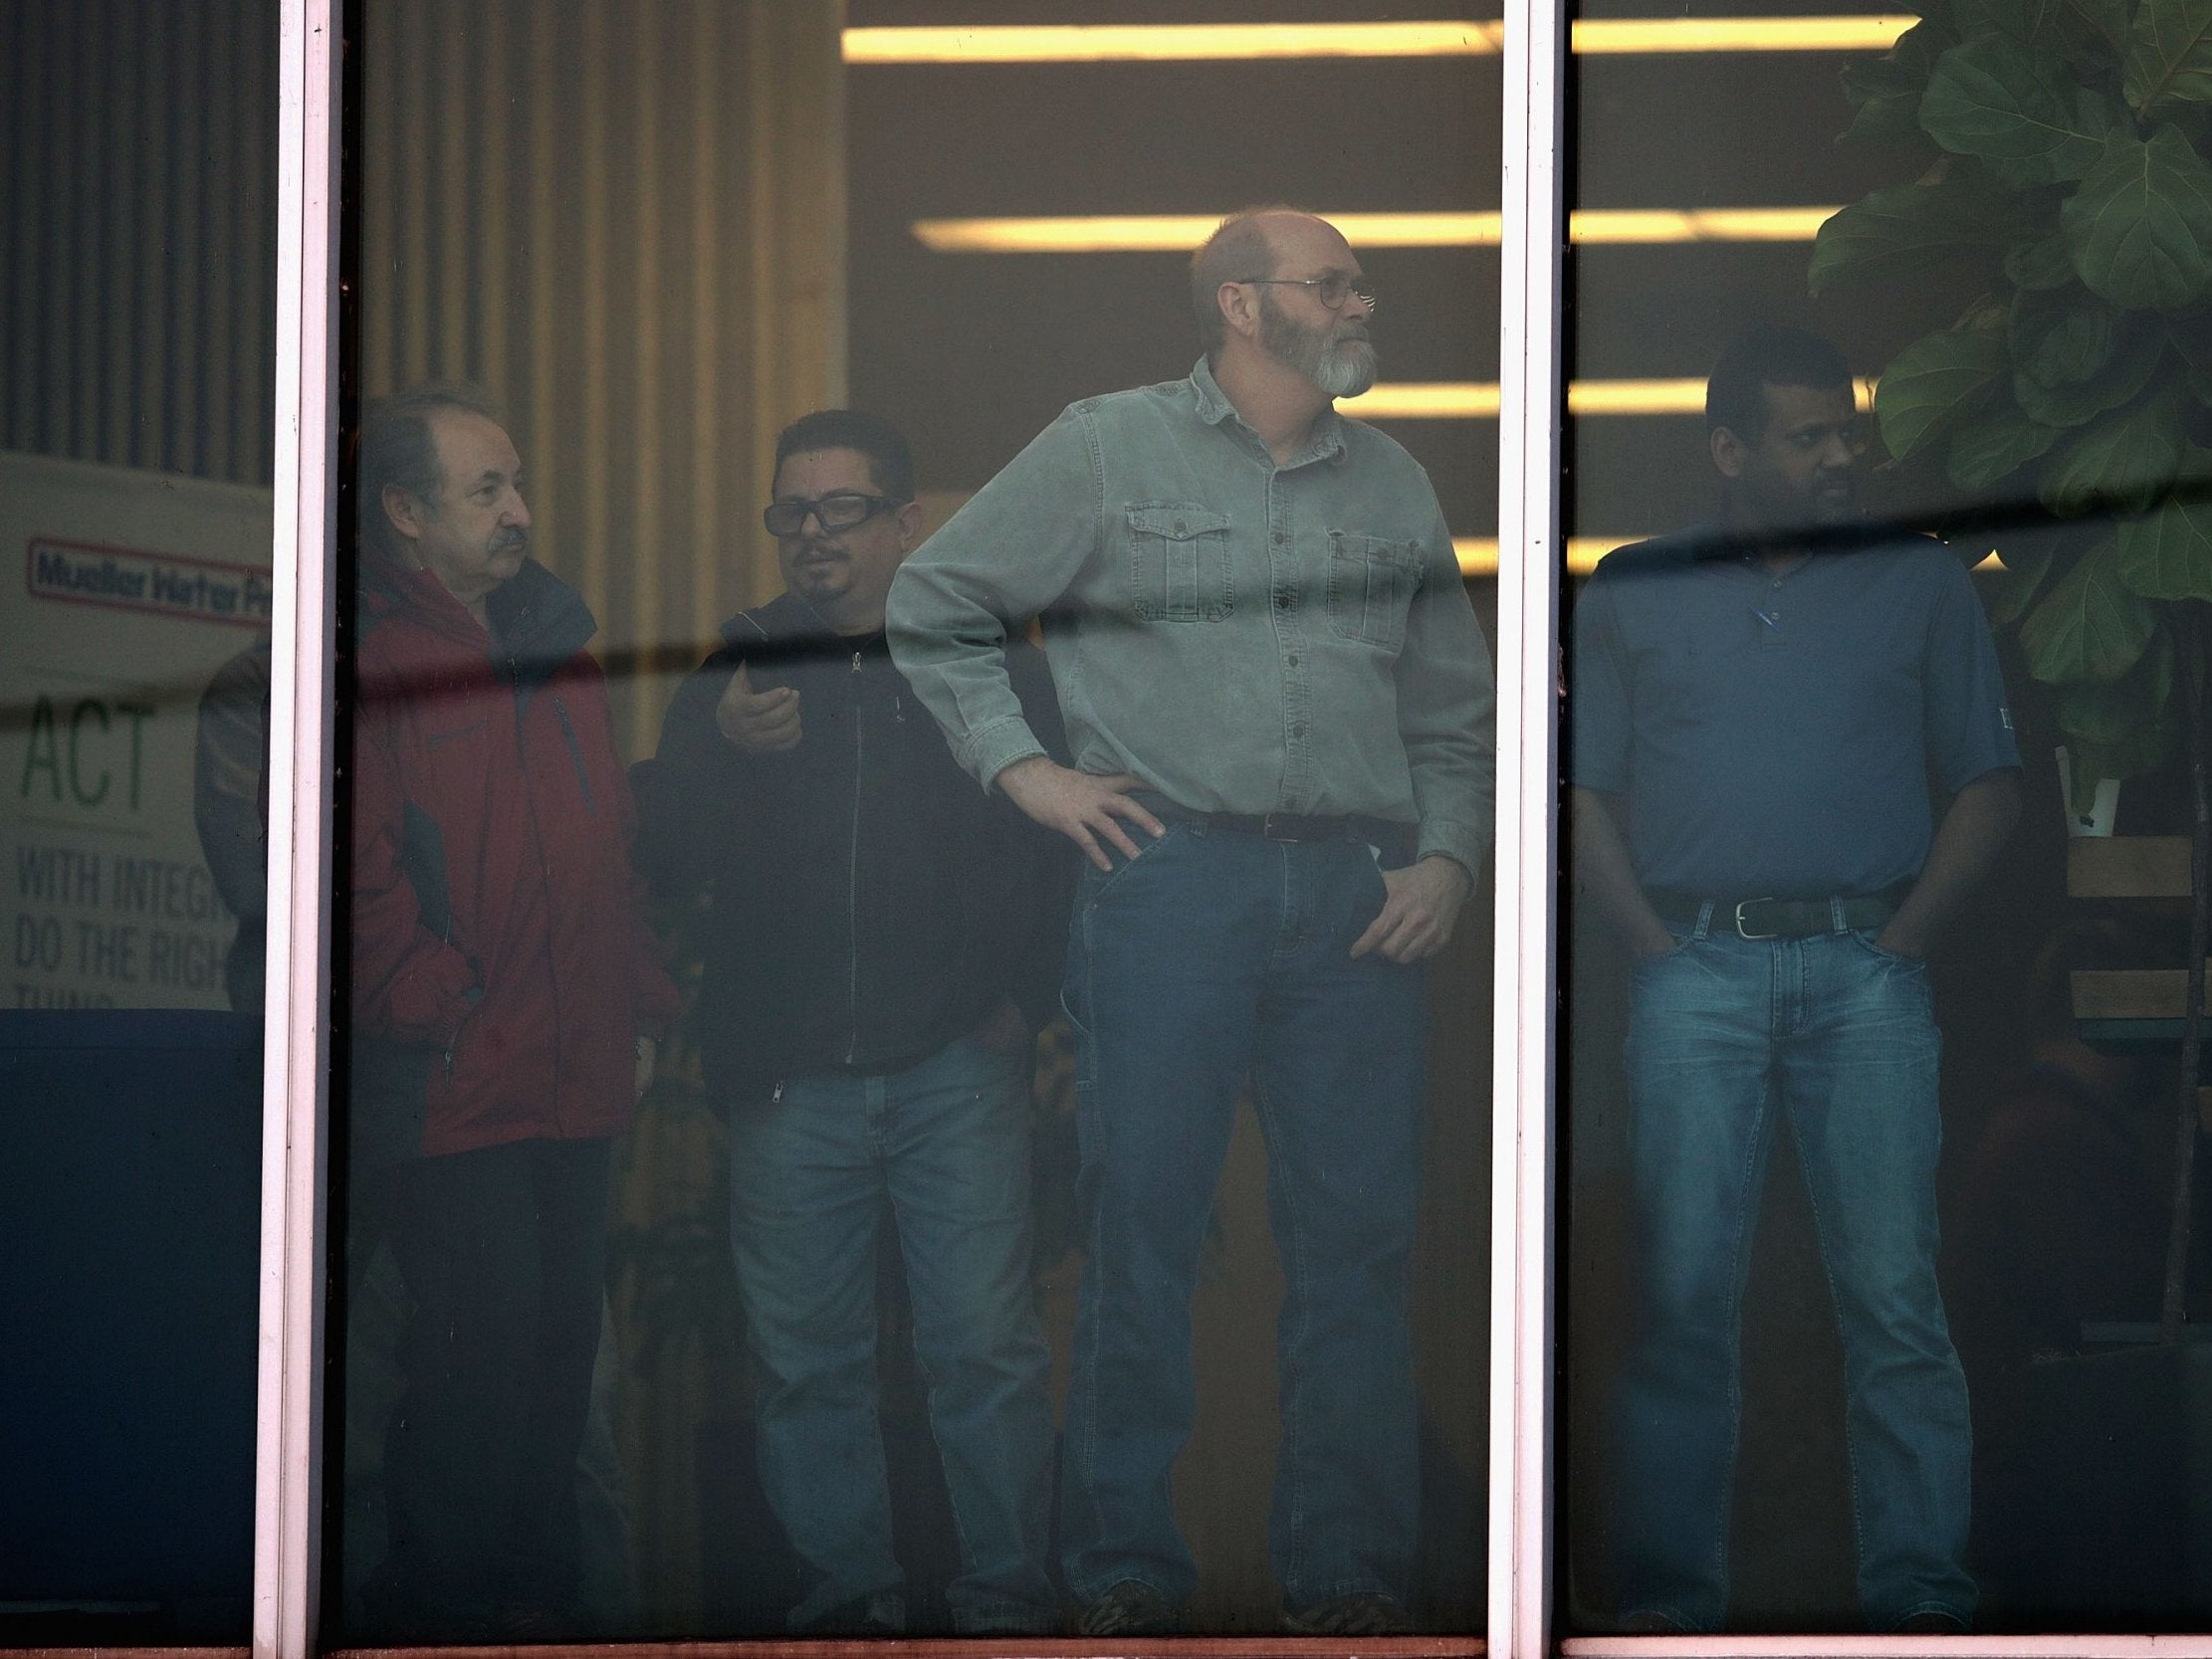 Workers look out of an office window following a shooting which killed five people and injured five police officers at the Henry Pratt Company in Aurora, Illinois, US, on 15 February, 2019.